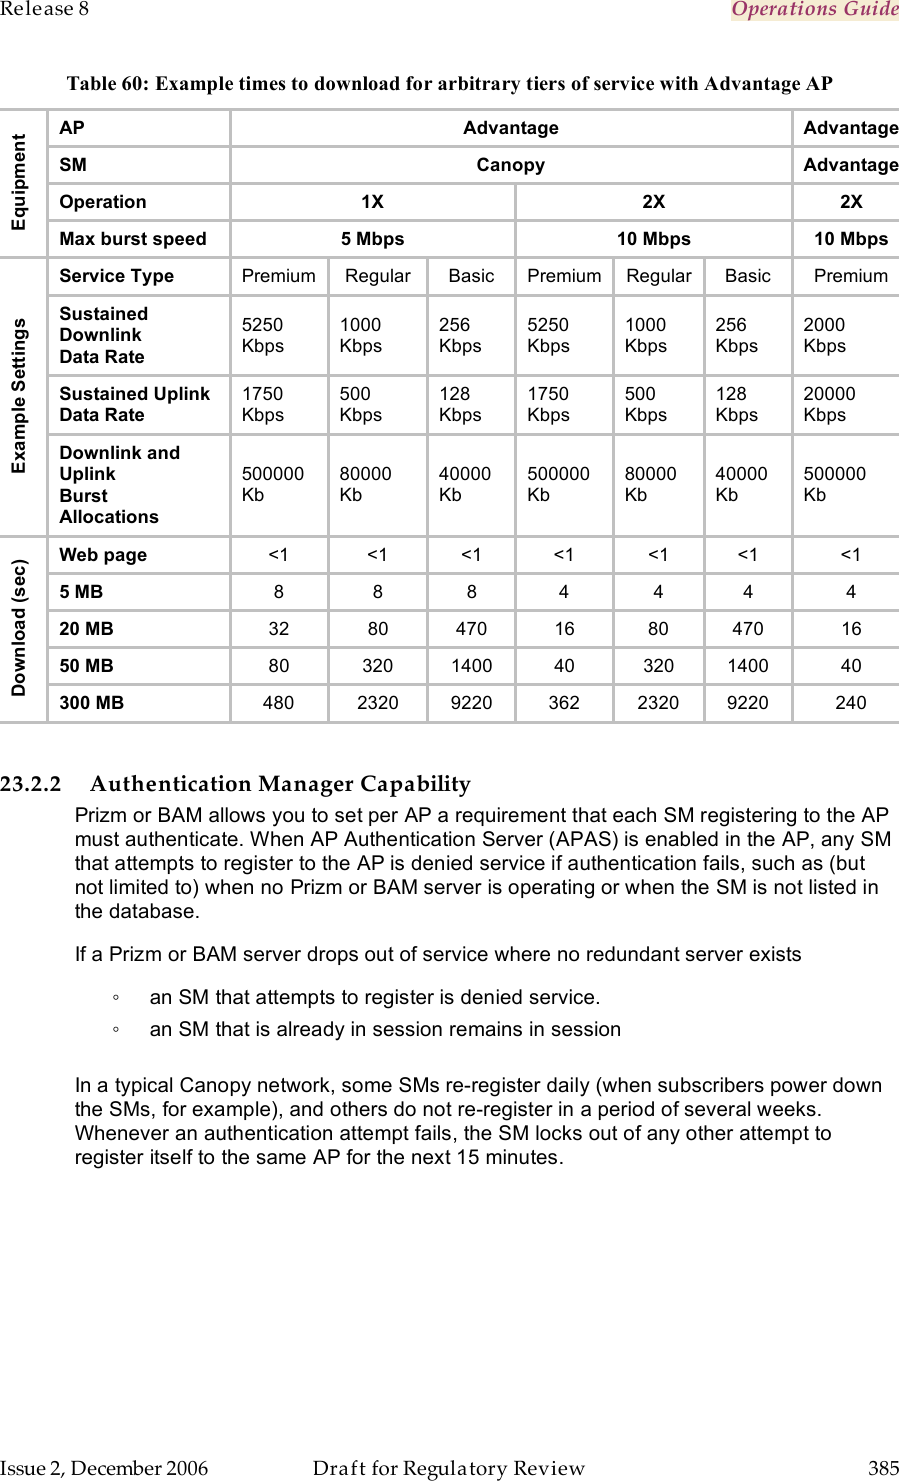 Release 8    Operations Guide   Issue 2, December 2006  Draft for Regulatory Review  385     Table 60: Example times to download for arbitrary tiers of service with Advantage AP AP Advantage Advantage SM Canopy Advantage Operation 1X 2X 2X Equipment Max burst speed  5 Mbps 10 Mbps 10 Mbps Service Type Premium Regular Basic Premium Regular Basic Premium Sustained Downlink Data Rate 5250 Kbps 1000 Kbps 256 Kbps 5250 Kbps 1000 Kbps 256 Kbps 2000 Kbps Sustained Uplink Data Rate  1750  Kbps 500  Kbps 128  Kbps 1750  Kbps 500  Kbps 128  Kbps 20000 Kbps Example Settings Downlink and Uplink Burst  Allocations 500000 Kb 80000 Kb 40000 Kb 500000 Kb 80000 Kb 40000 Kb 500000 Kb Web page &lt;1 &lt;1 &lt;1 &lt;1 &lt;1 &lt;1 &lt;1 5 MB 8 8 8 4 4 4 4 20 MB 32 80 470 16 80 470 16 50 MB 80 320 1400 40 320 1400 40 Download (sec) 300 MB 480 2320 9220 362 2320 9220 240  23.2.2 Authentication Manager Capability Prizm or BAM allows you to set per AP a requirement that each SM registering to the AP must authenticate. When AP Authentication Server (APAS) is enabled in the AP, any SM that attempts to register to the AP is denied service if authentication fails, such as (but not limited to) when no Prizm or BAM server is operating or when the SM is not listed in the database.  If a Prizm or BAM server drops out of service where no redundant server exists ◦  an SM that attempts to register is denied service.  ◦  an SM that is already in session remains in session   In a typical Canopy network, some SMs re-register daily (when subscribers power down the SMs, for example), and others do not re-register in a period of several weeks. Whenever an authentication attempt fails, the SM locks out of any other attempt to register itself to the same AP for the next 15 minutes. 